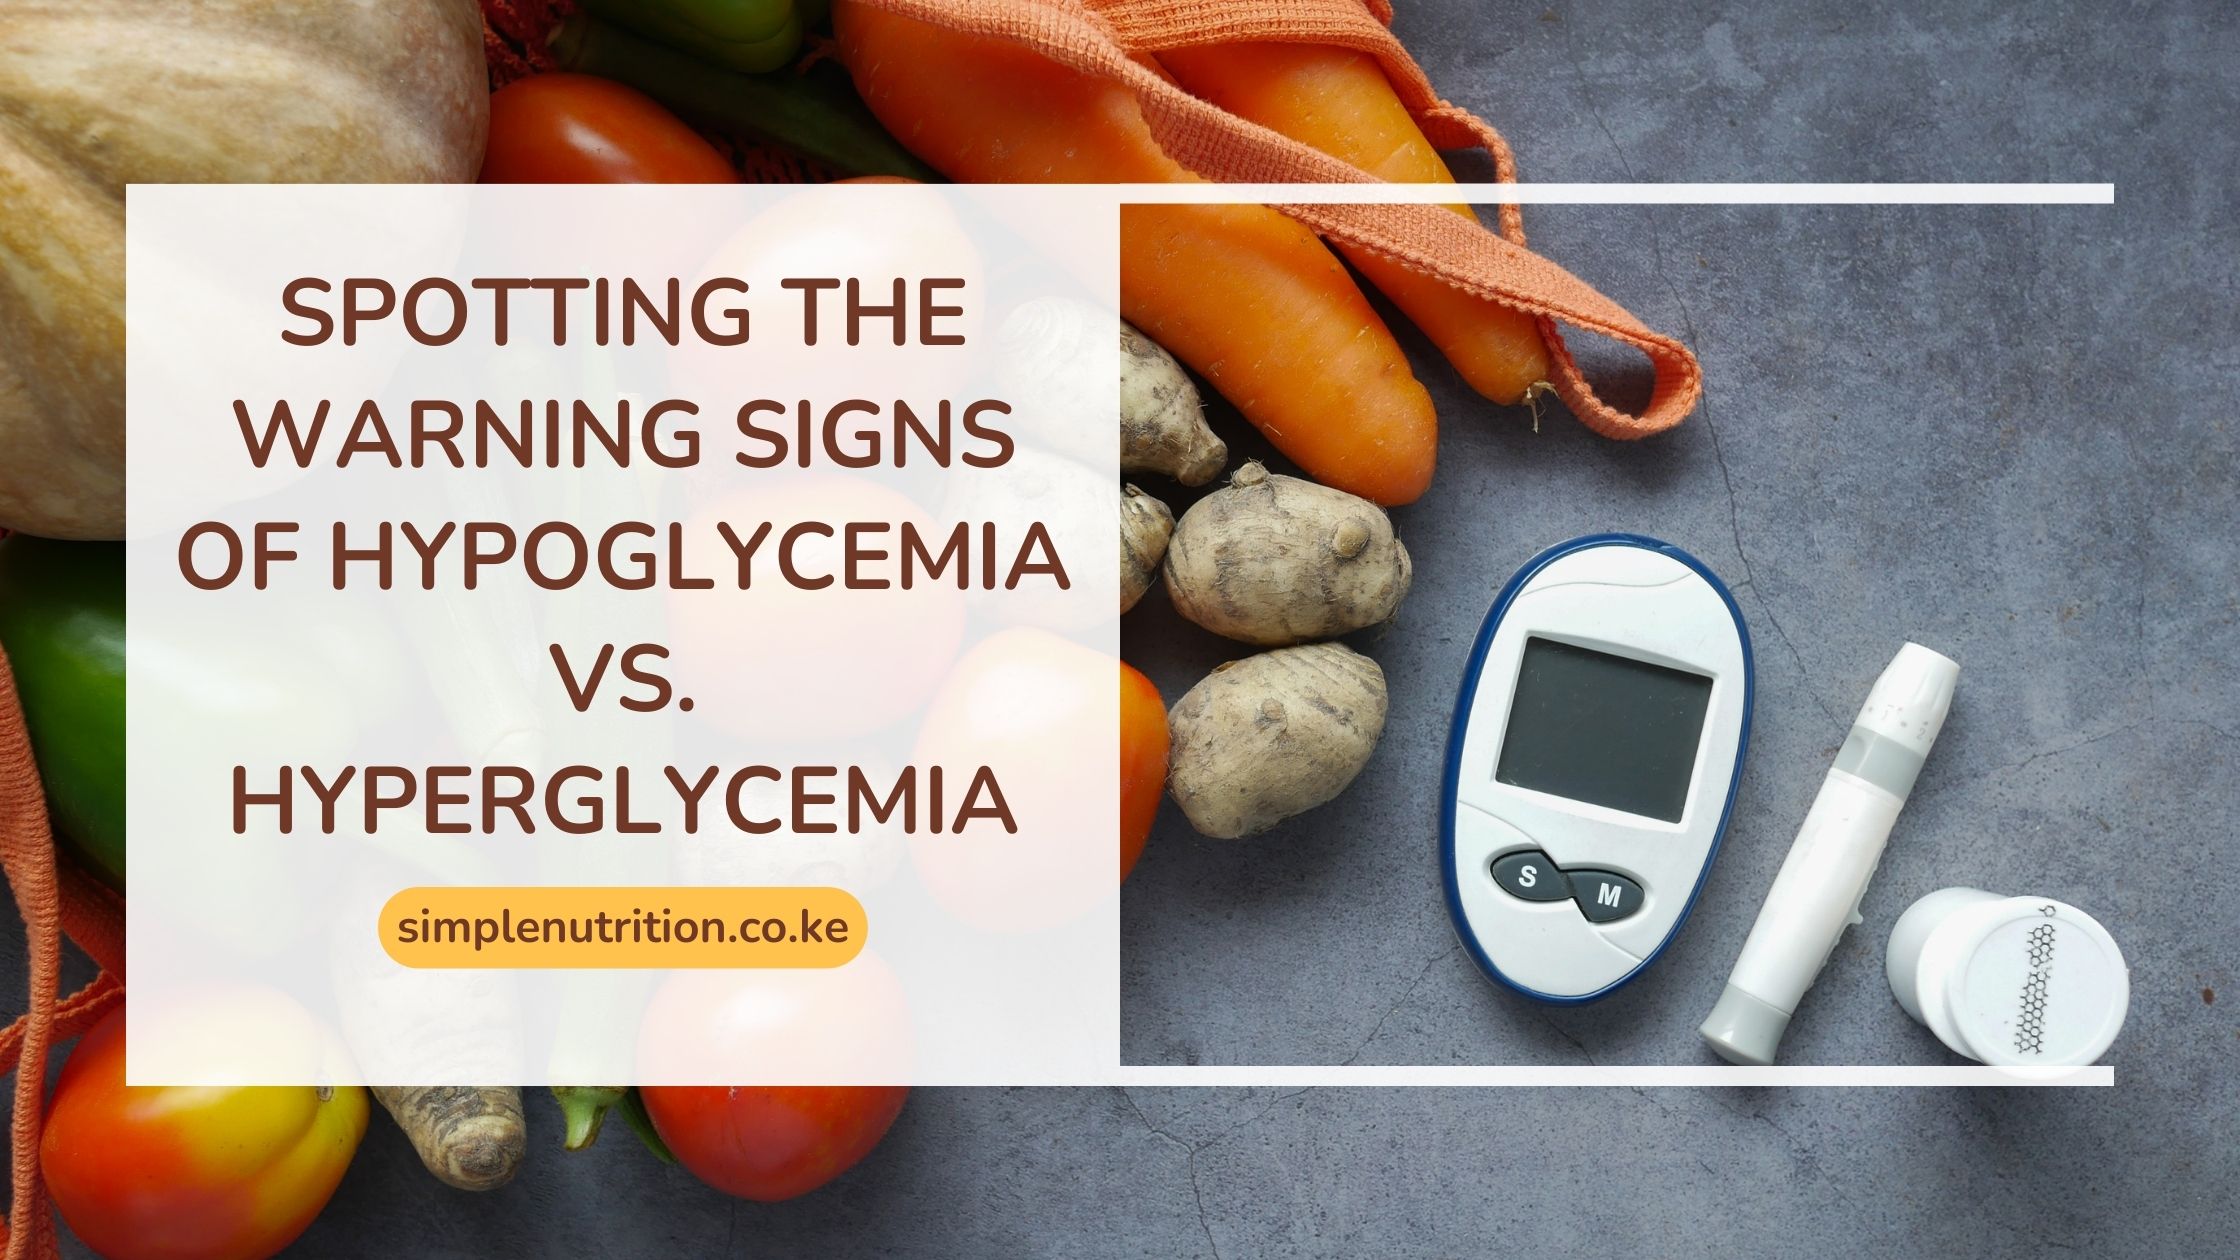 How To Spot the Warning Signs of Diabetes, Hypoglycemia vs. Hyperglycemia